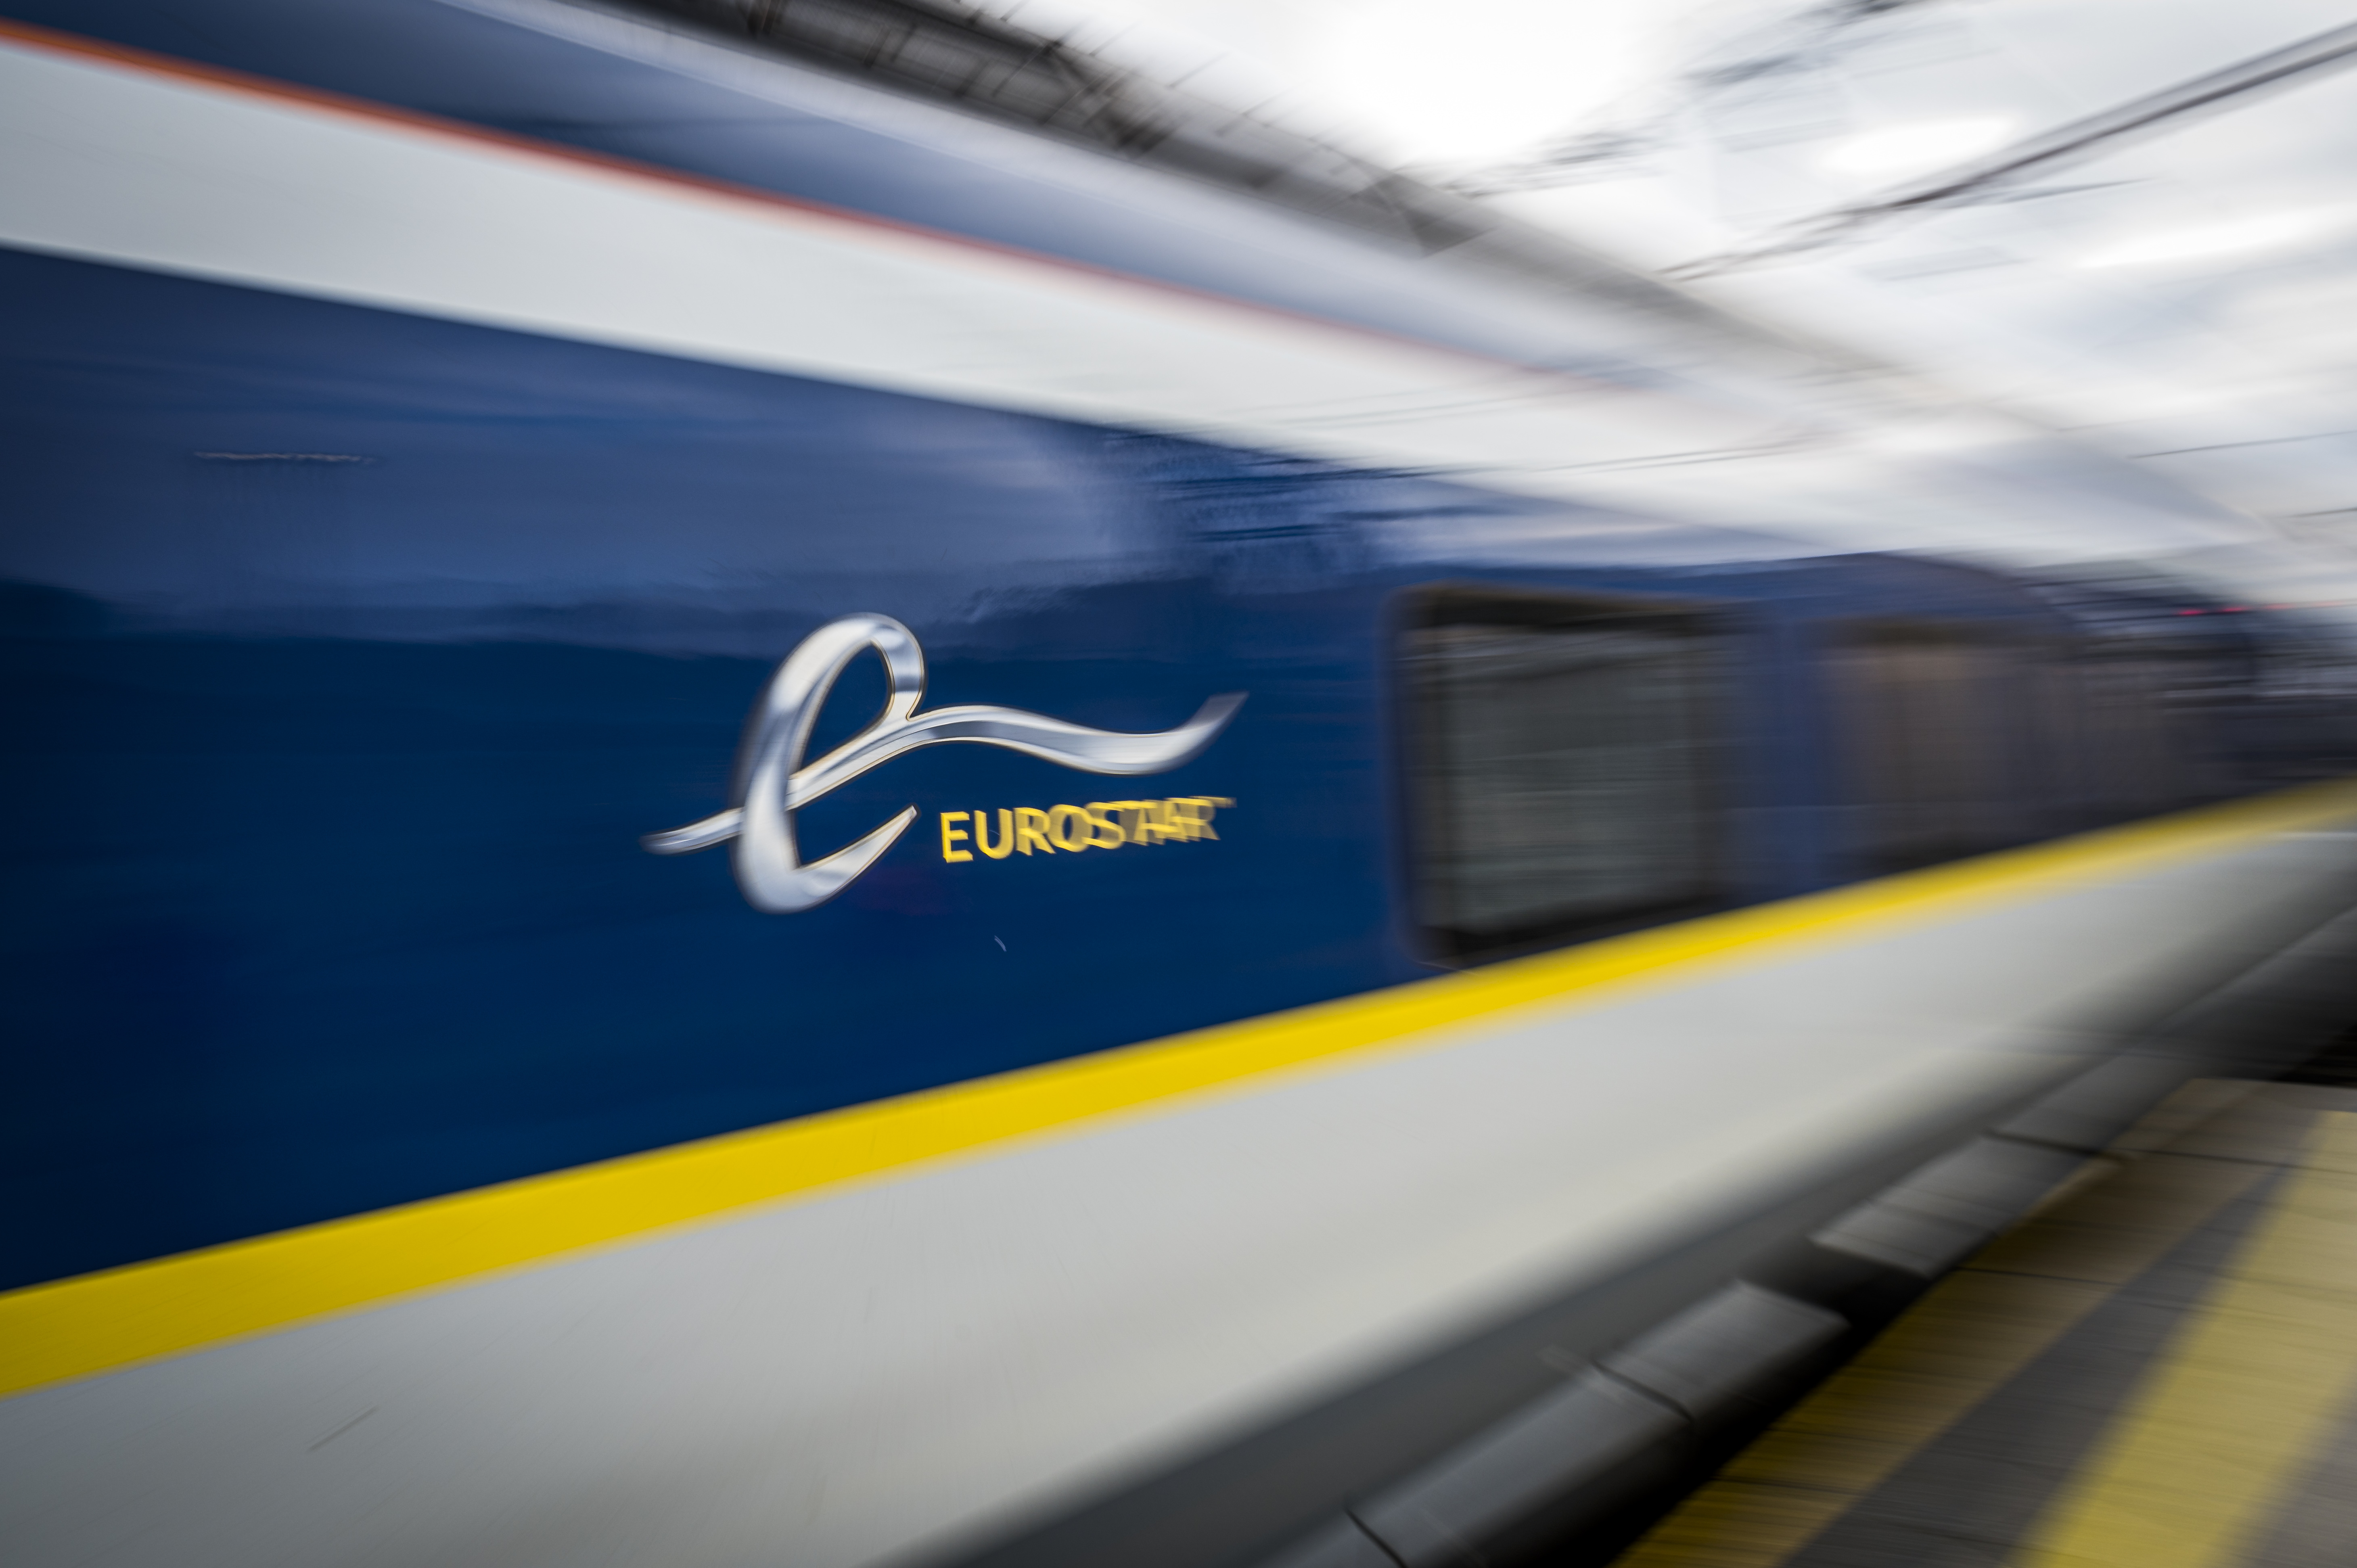 Thalys brand to disappear after merger with Eurostar